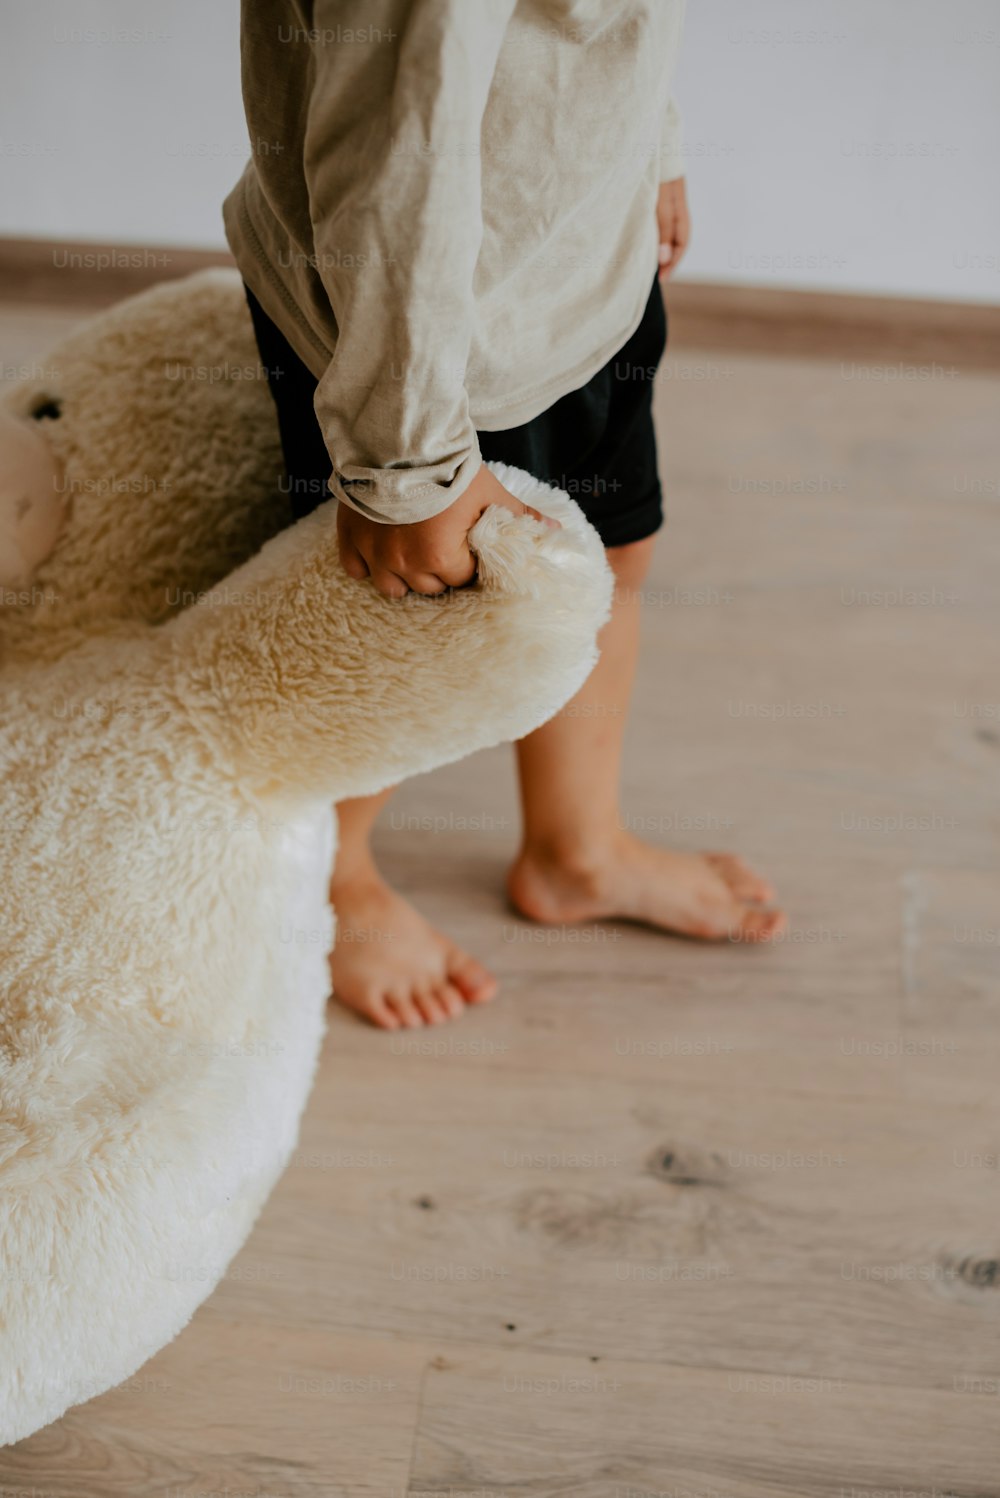 a person holding a stuffed animal on a wooden floor